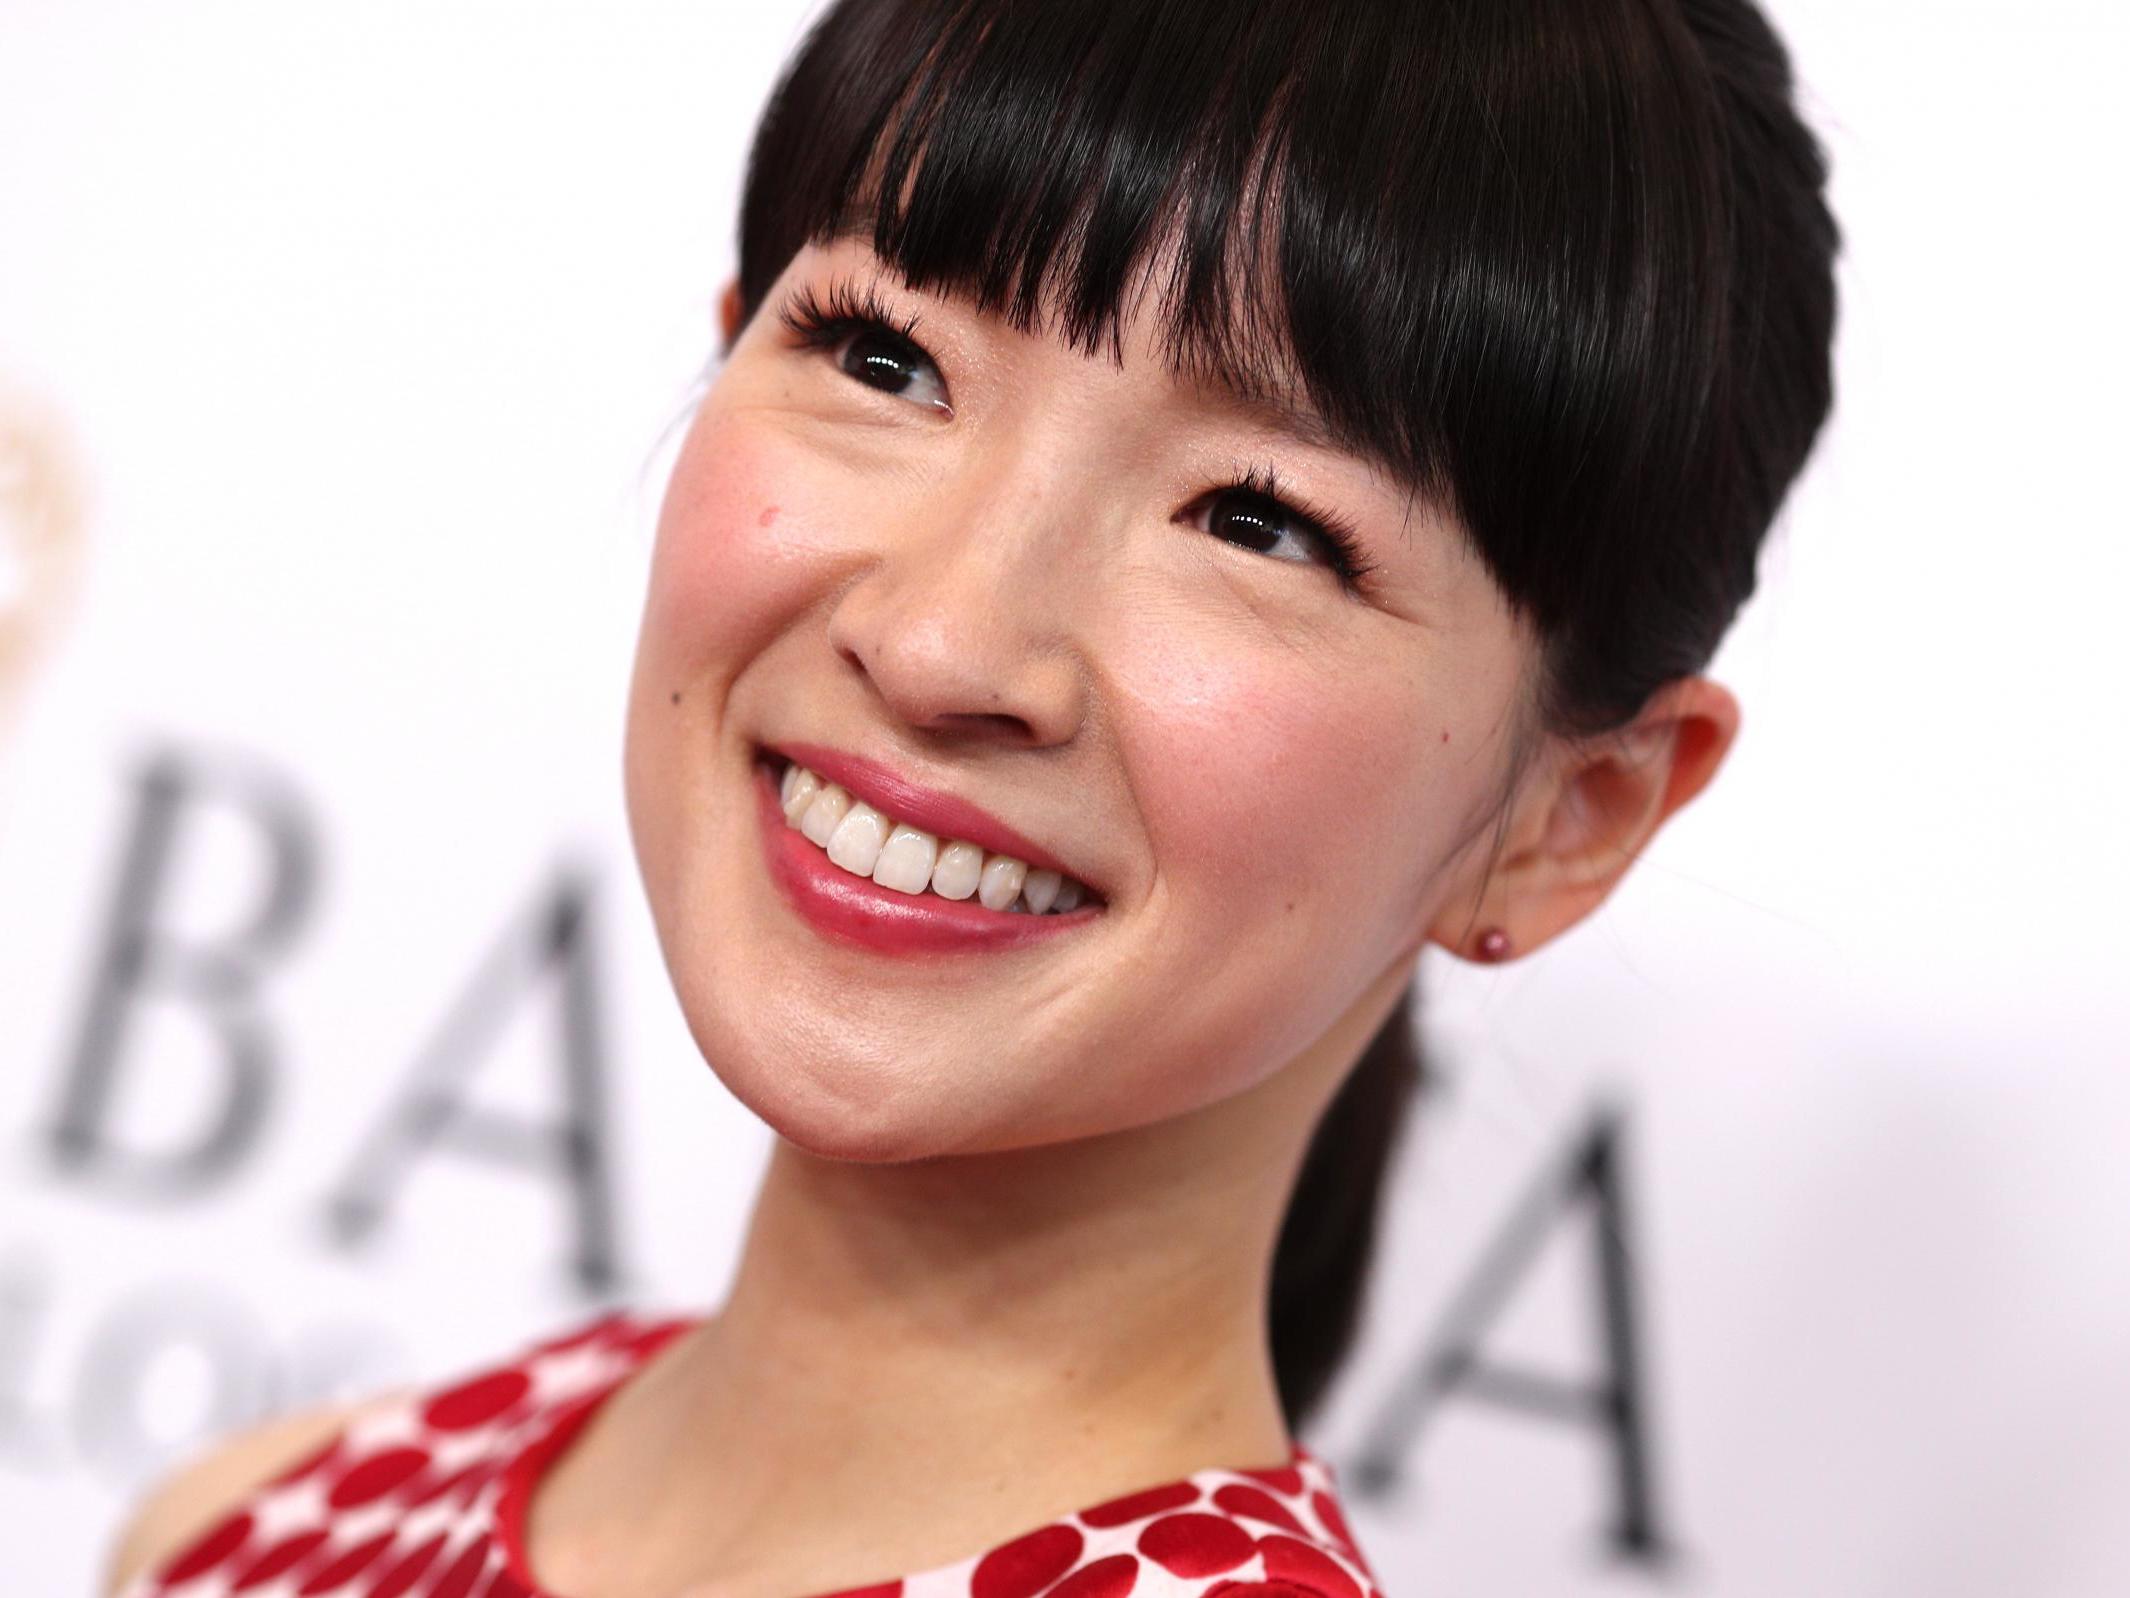 Marie Kondo joins Mrs Hinch, Clean Mama and the Queen of Clean among the most popular ‘cleanfluencers’